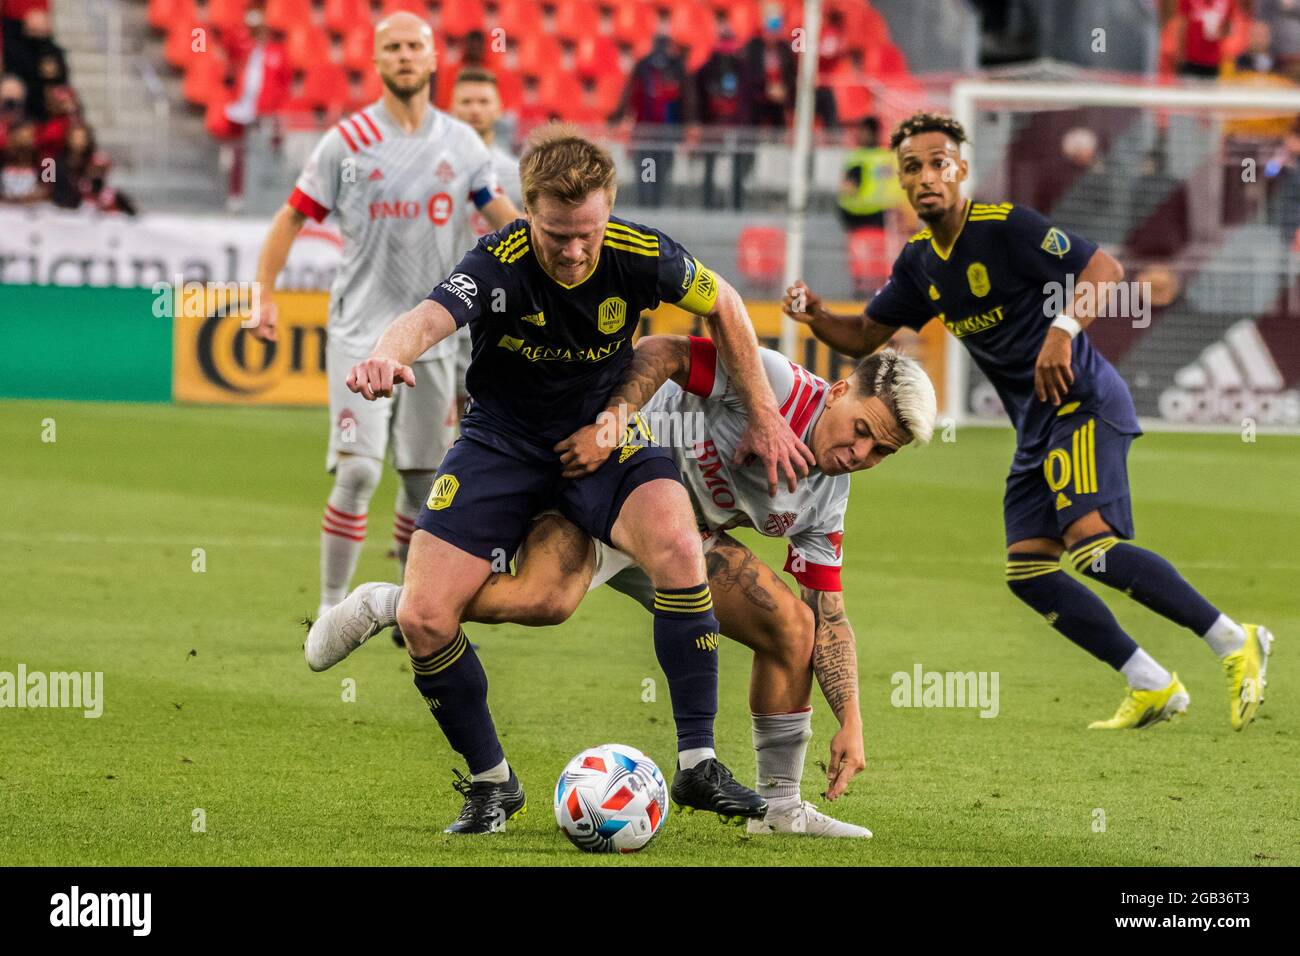 Toronto, Canada. 01st Aug, 2021. Yeferson Soteldo (30) and Dax McCarty (6)  are seen in action during the MLS football match between Toronto FC and  Nashville SC at BMO Field stadium. (Final